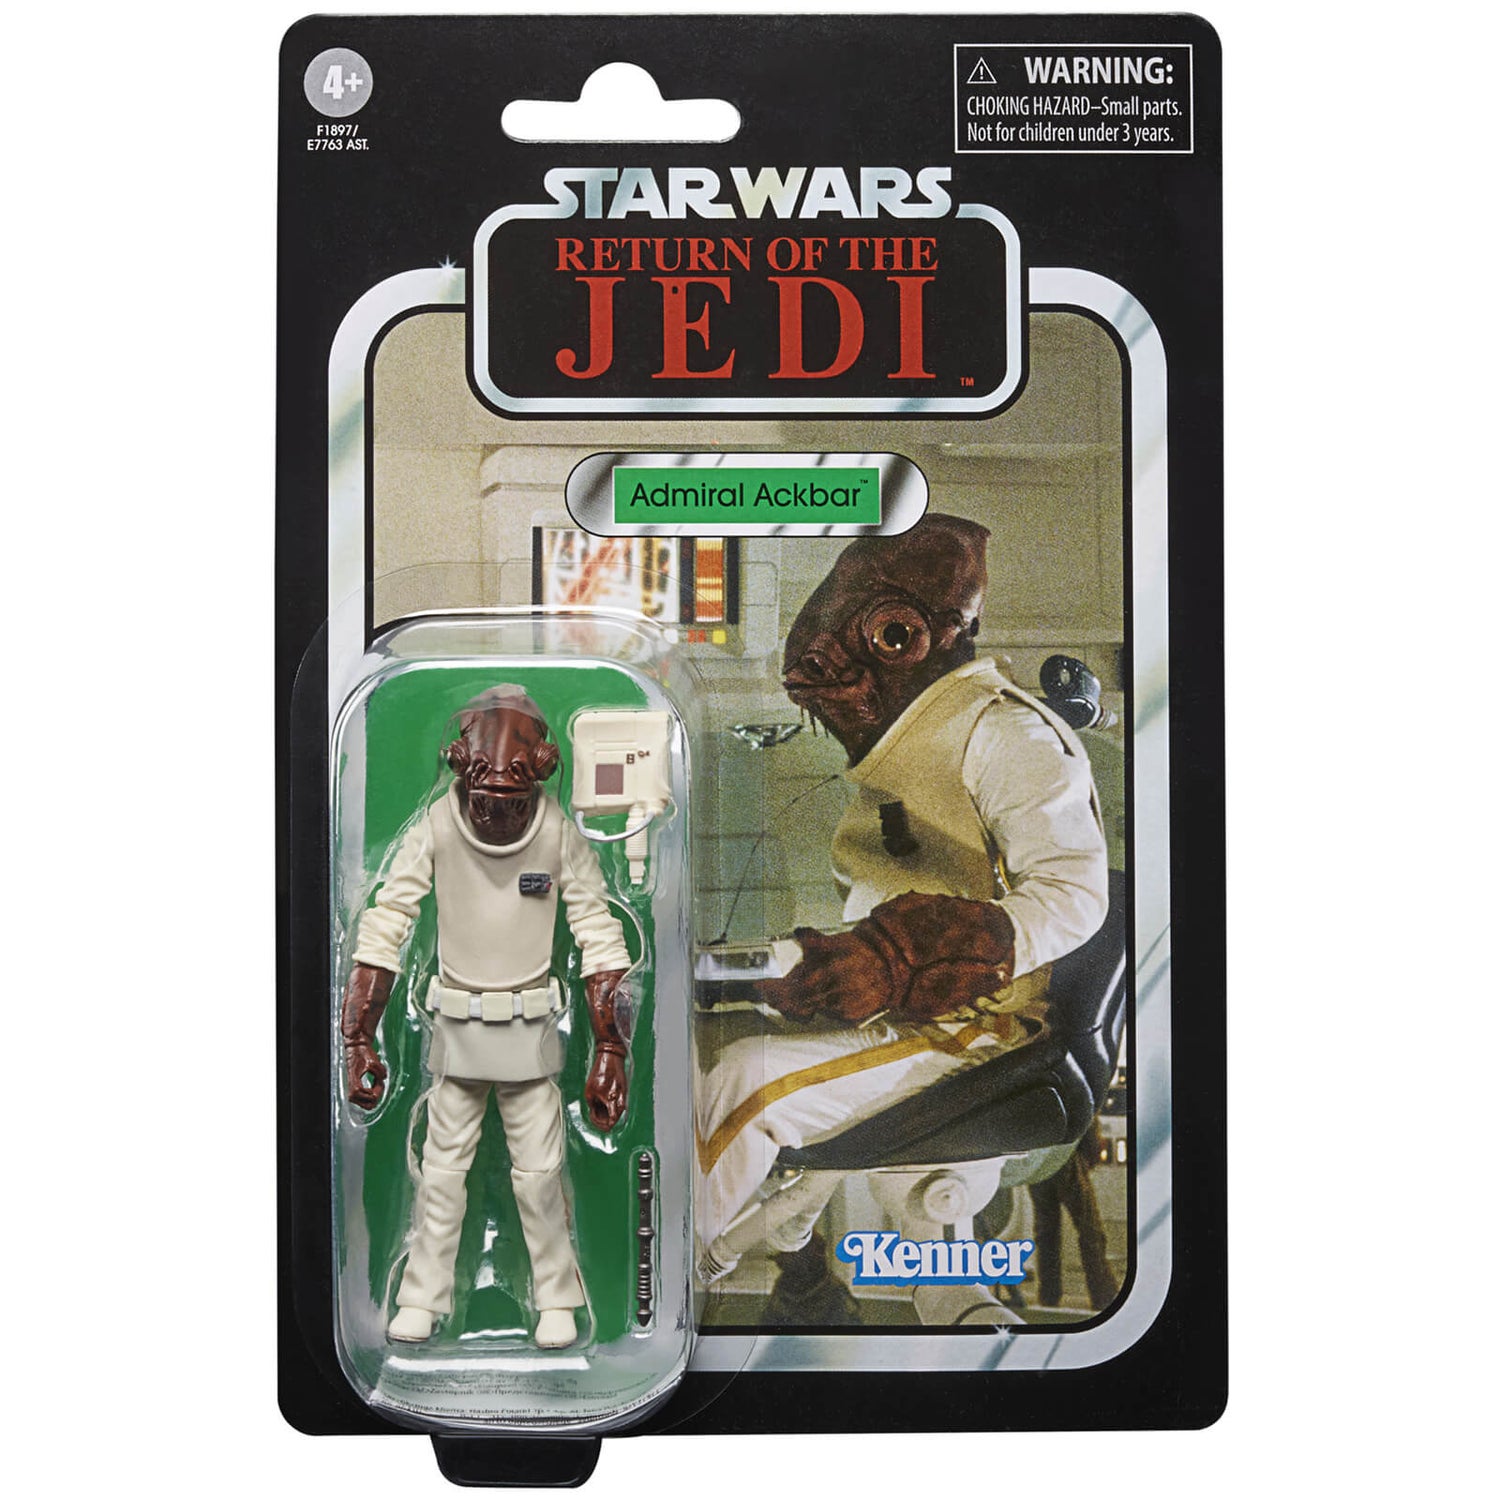 Hasbro Star Wars The Vintage Collection Return of the Jedi Admiral Ackbar Action Figure